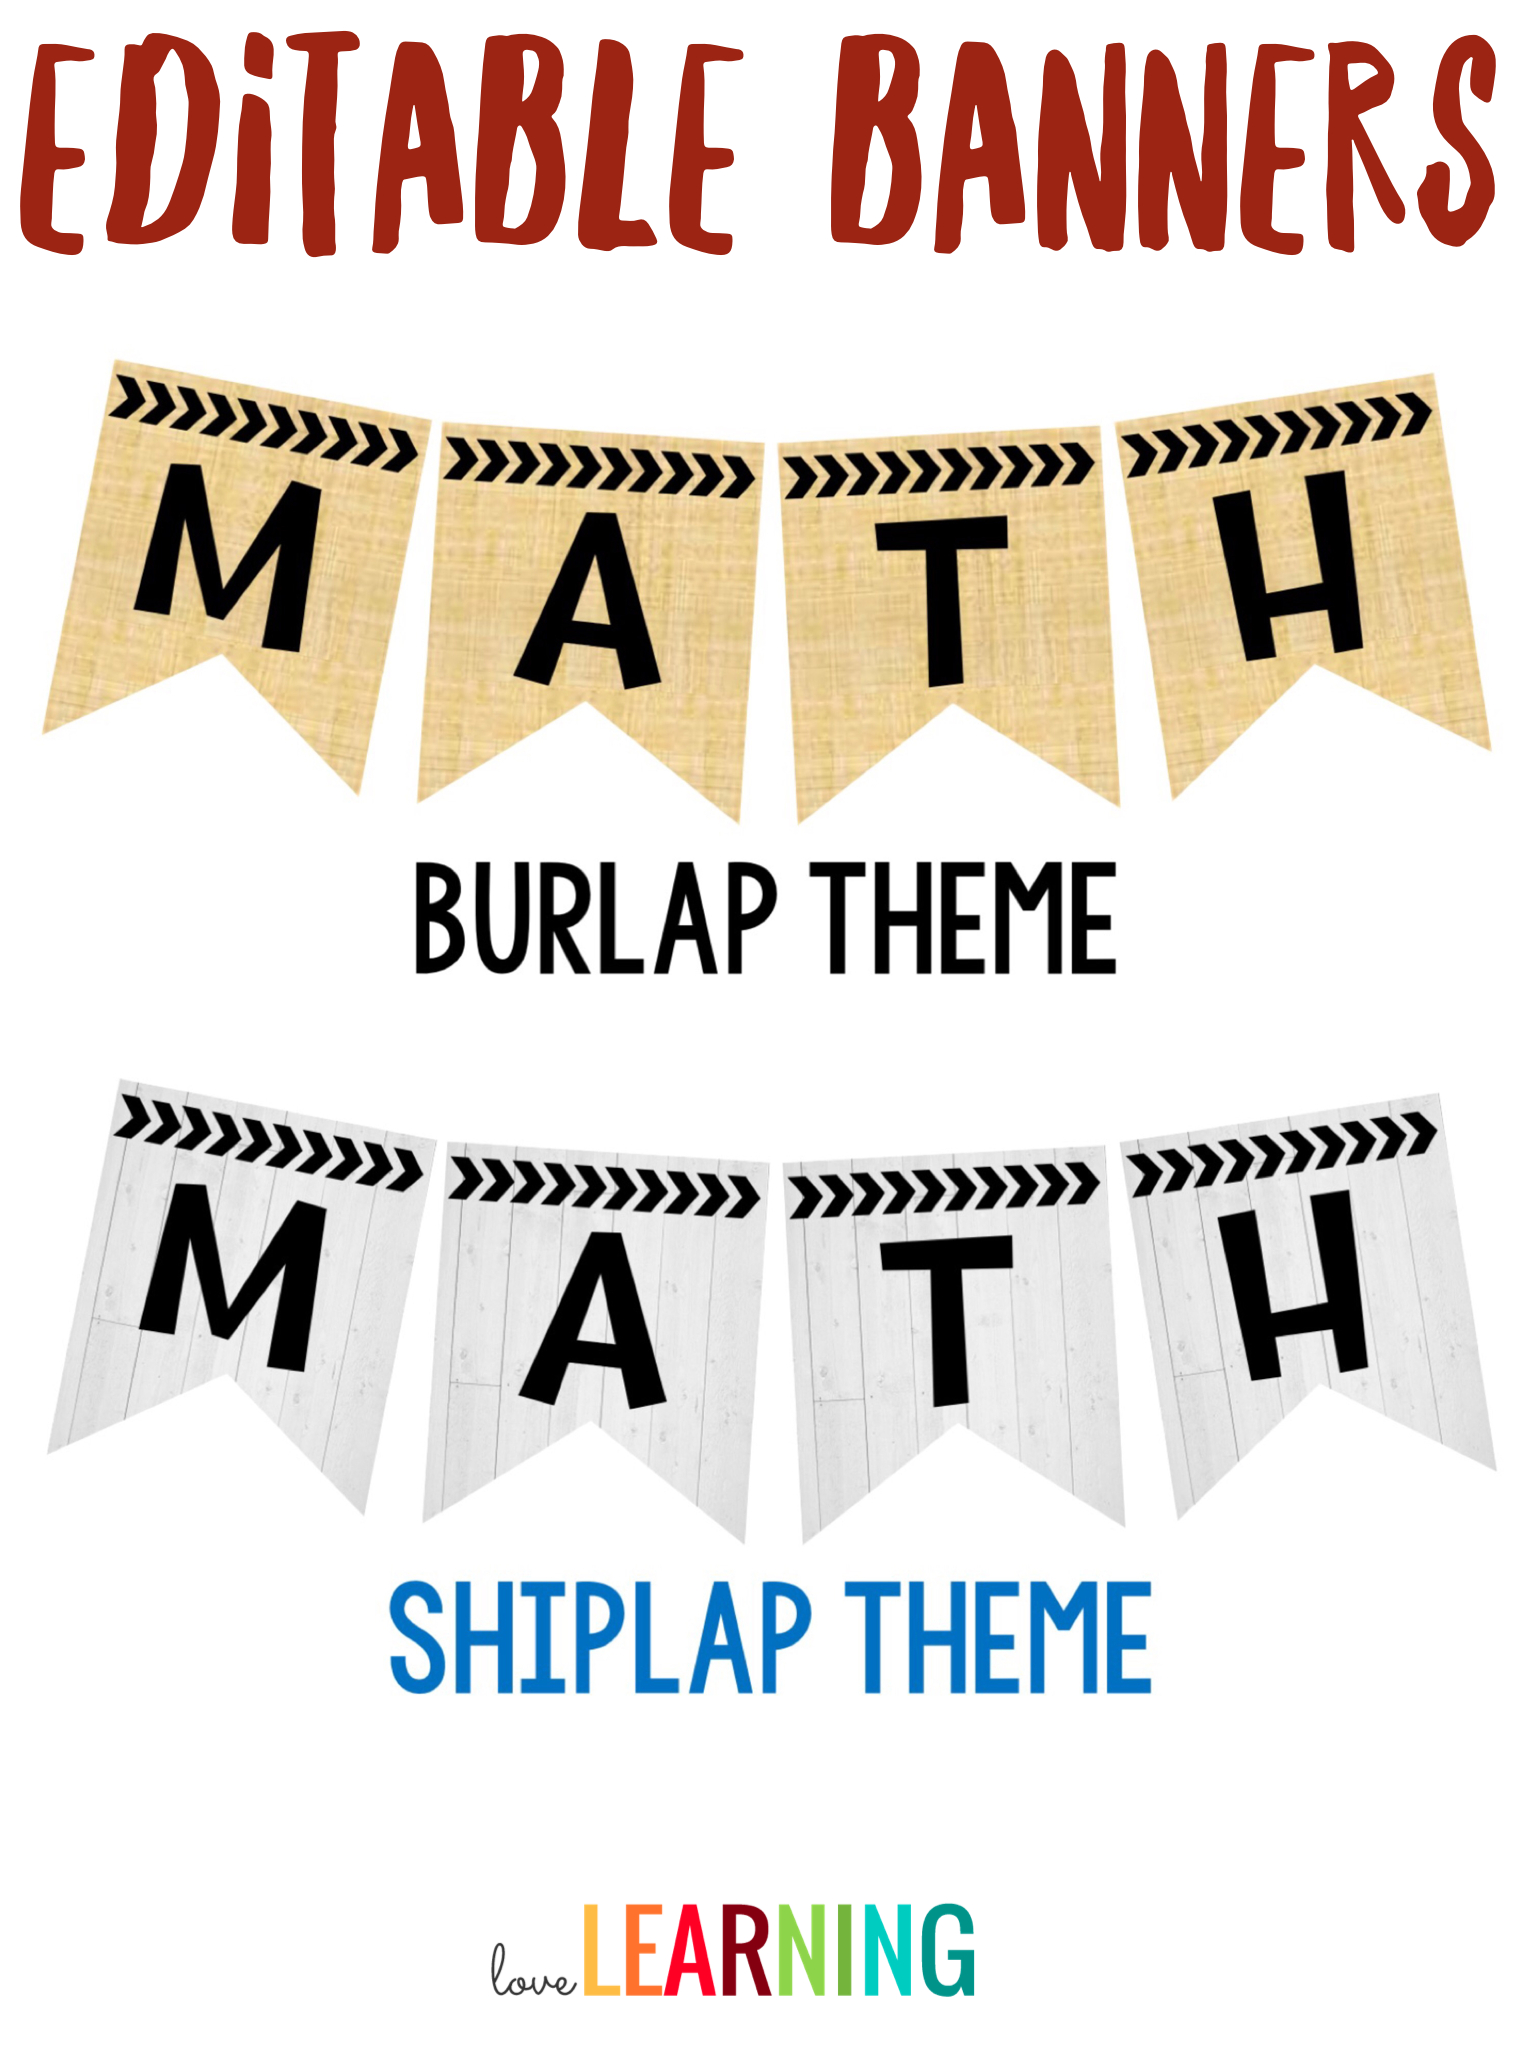 Editable Subject Banners – Burlap Theme | Classroom Intended For Classroom Banner Template